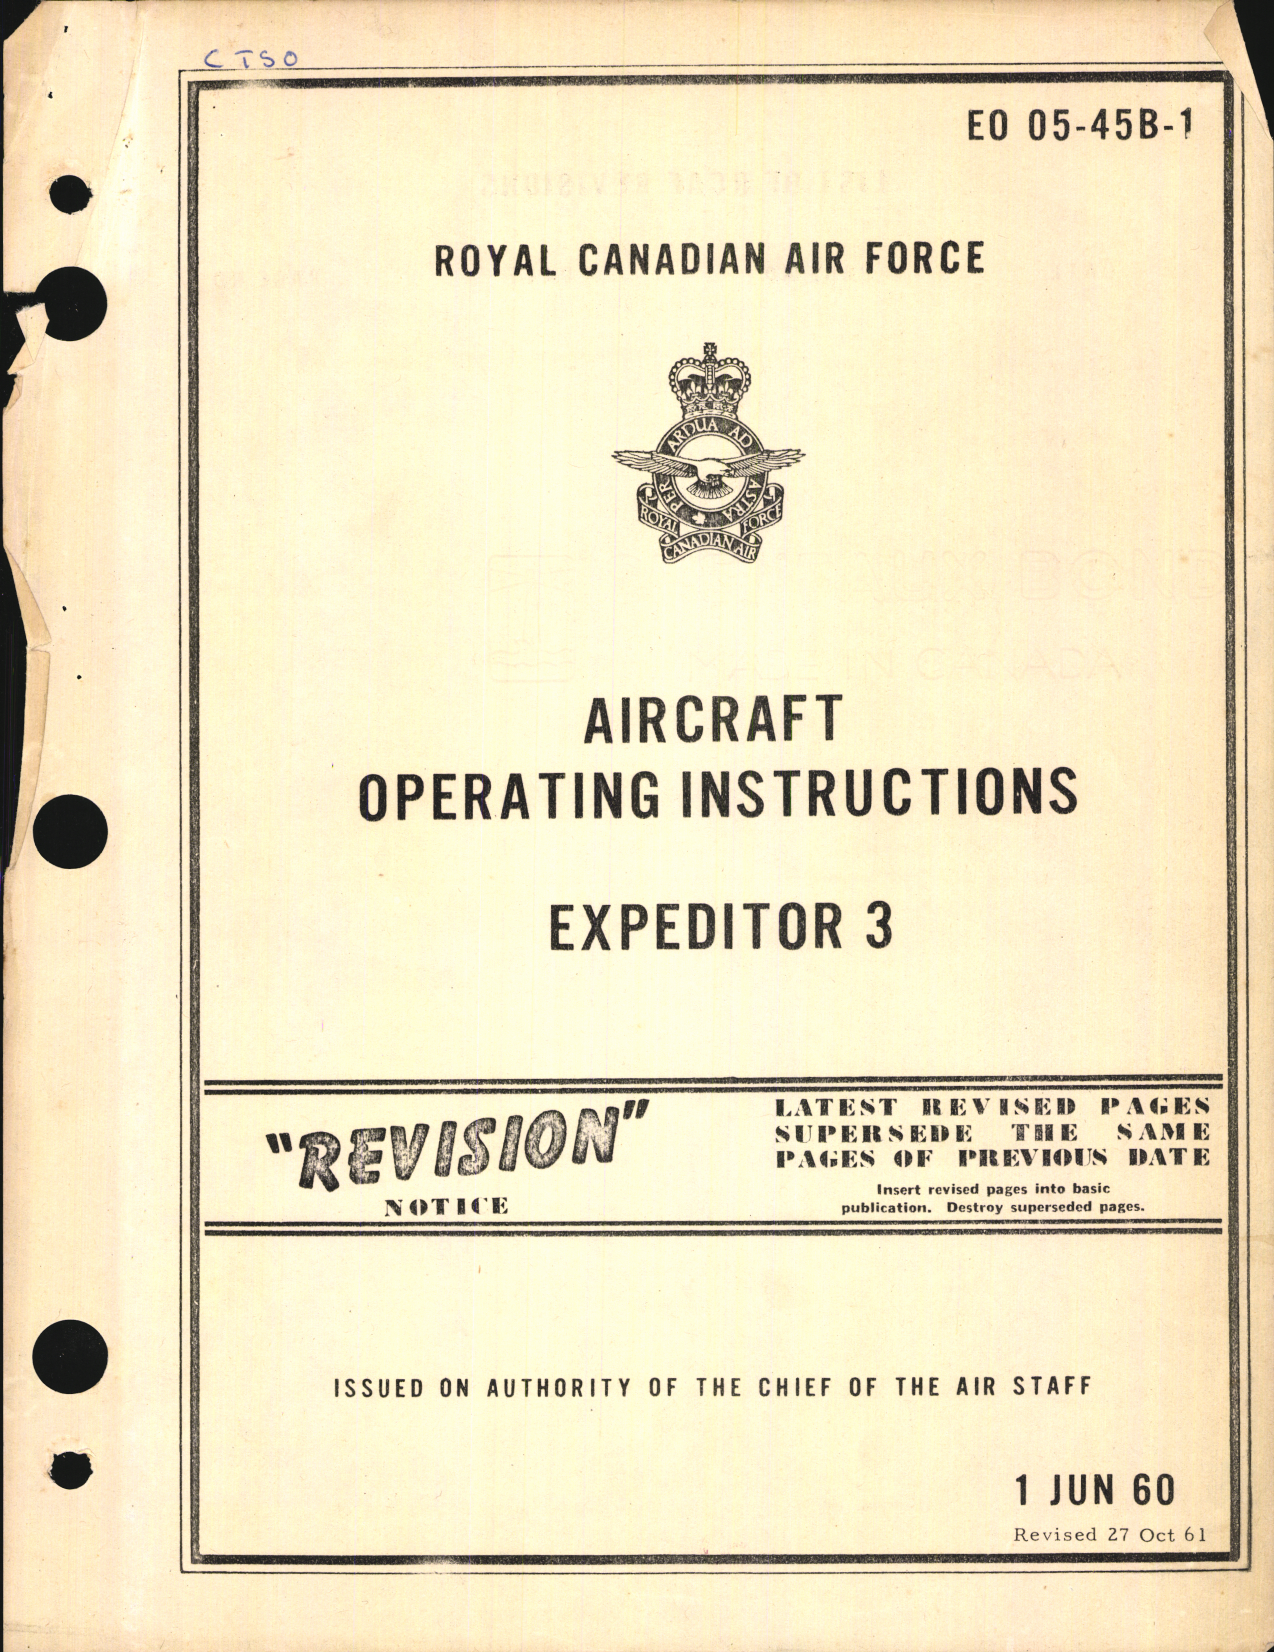 Sample page 1 from AirCorps Library document: Aircraft Operating Instructions for Expeditor 3 (Royal Canadian Air Force)